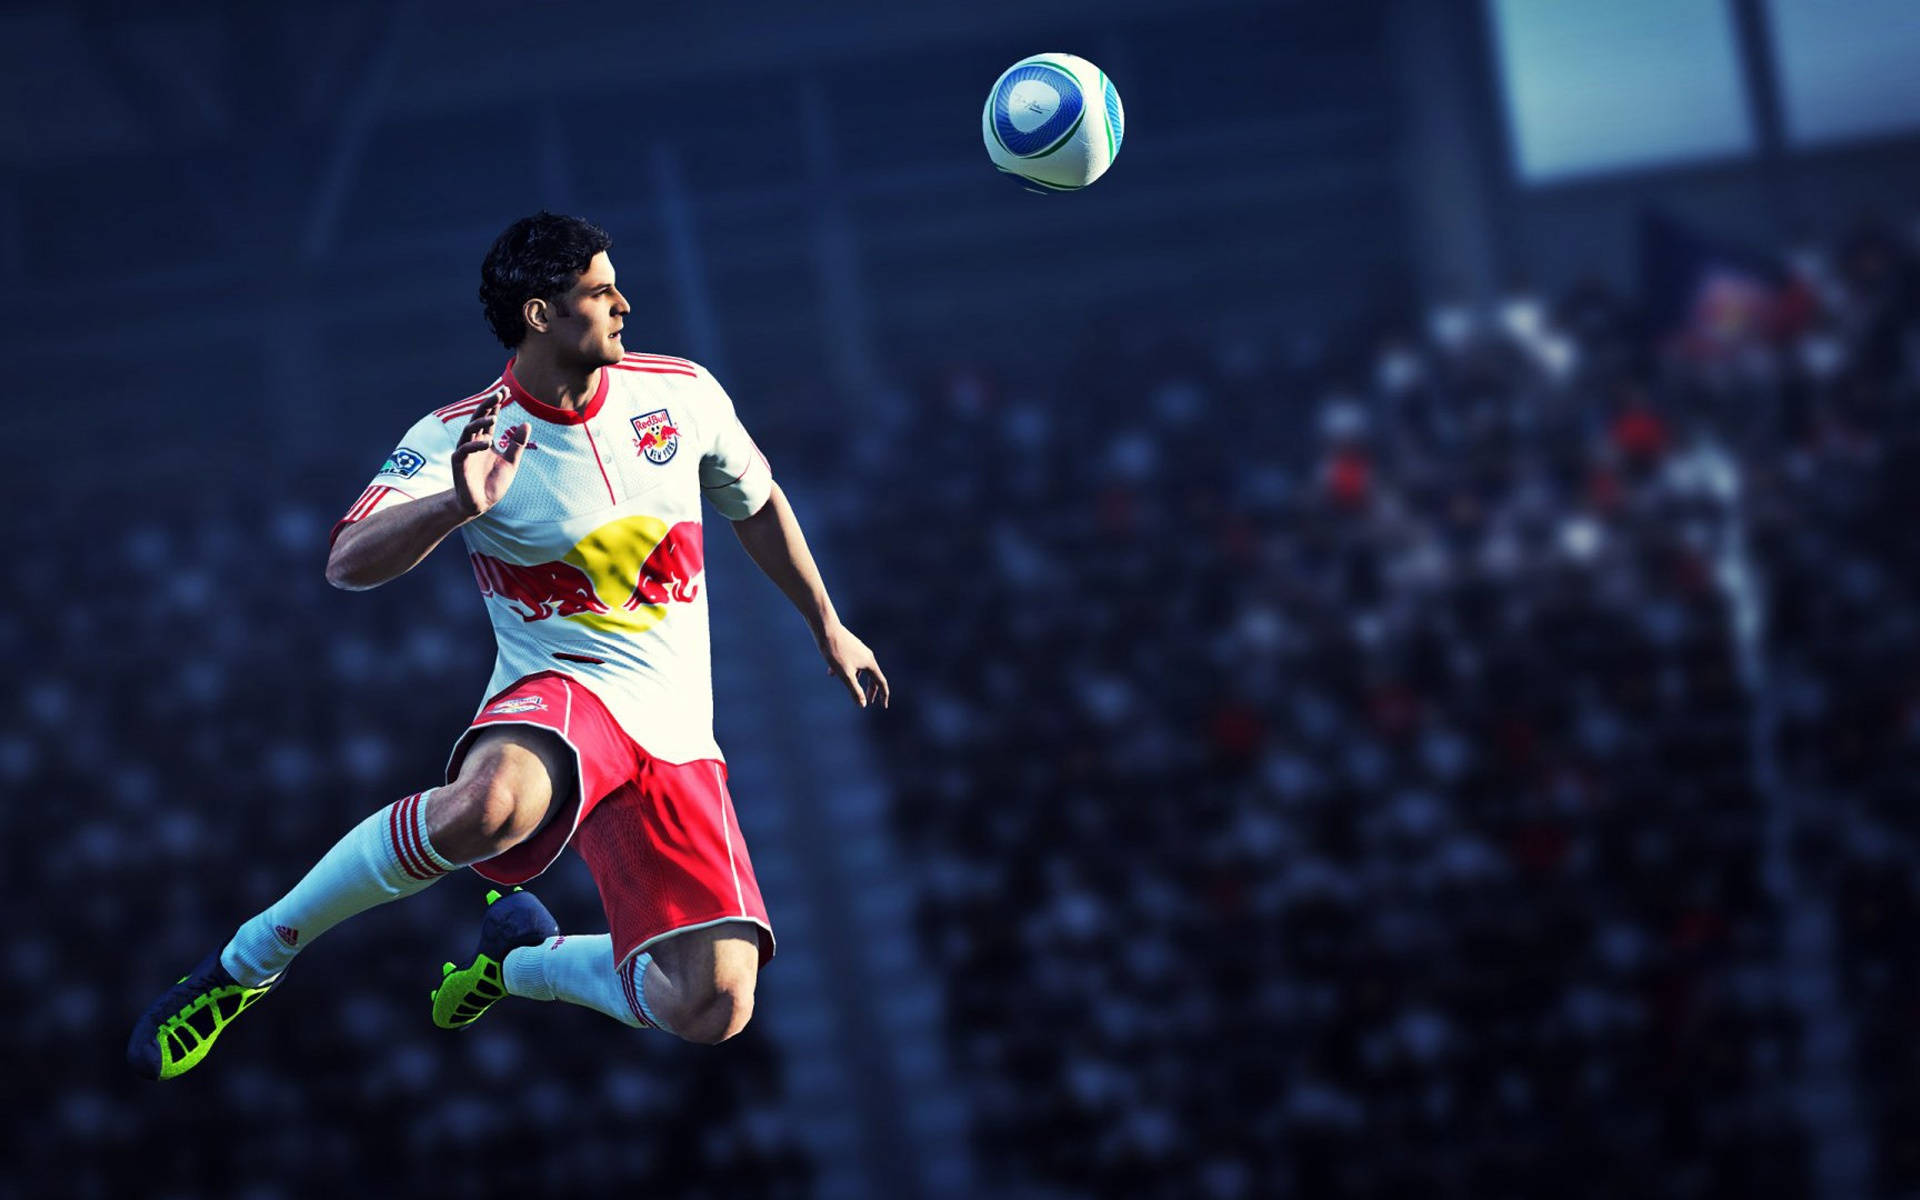 Professional Soccer Players Competing in a Thrilling Match Wallpaper